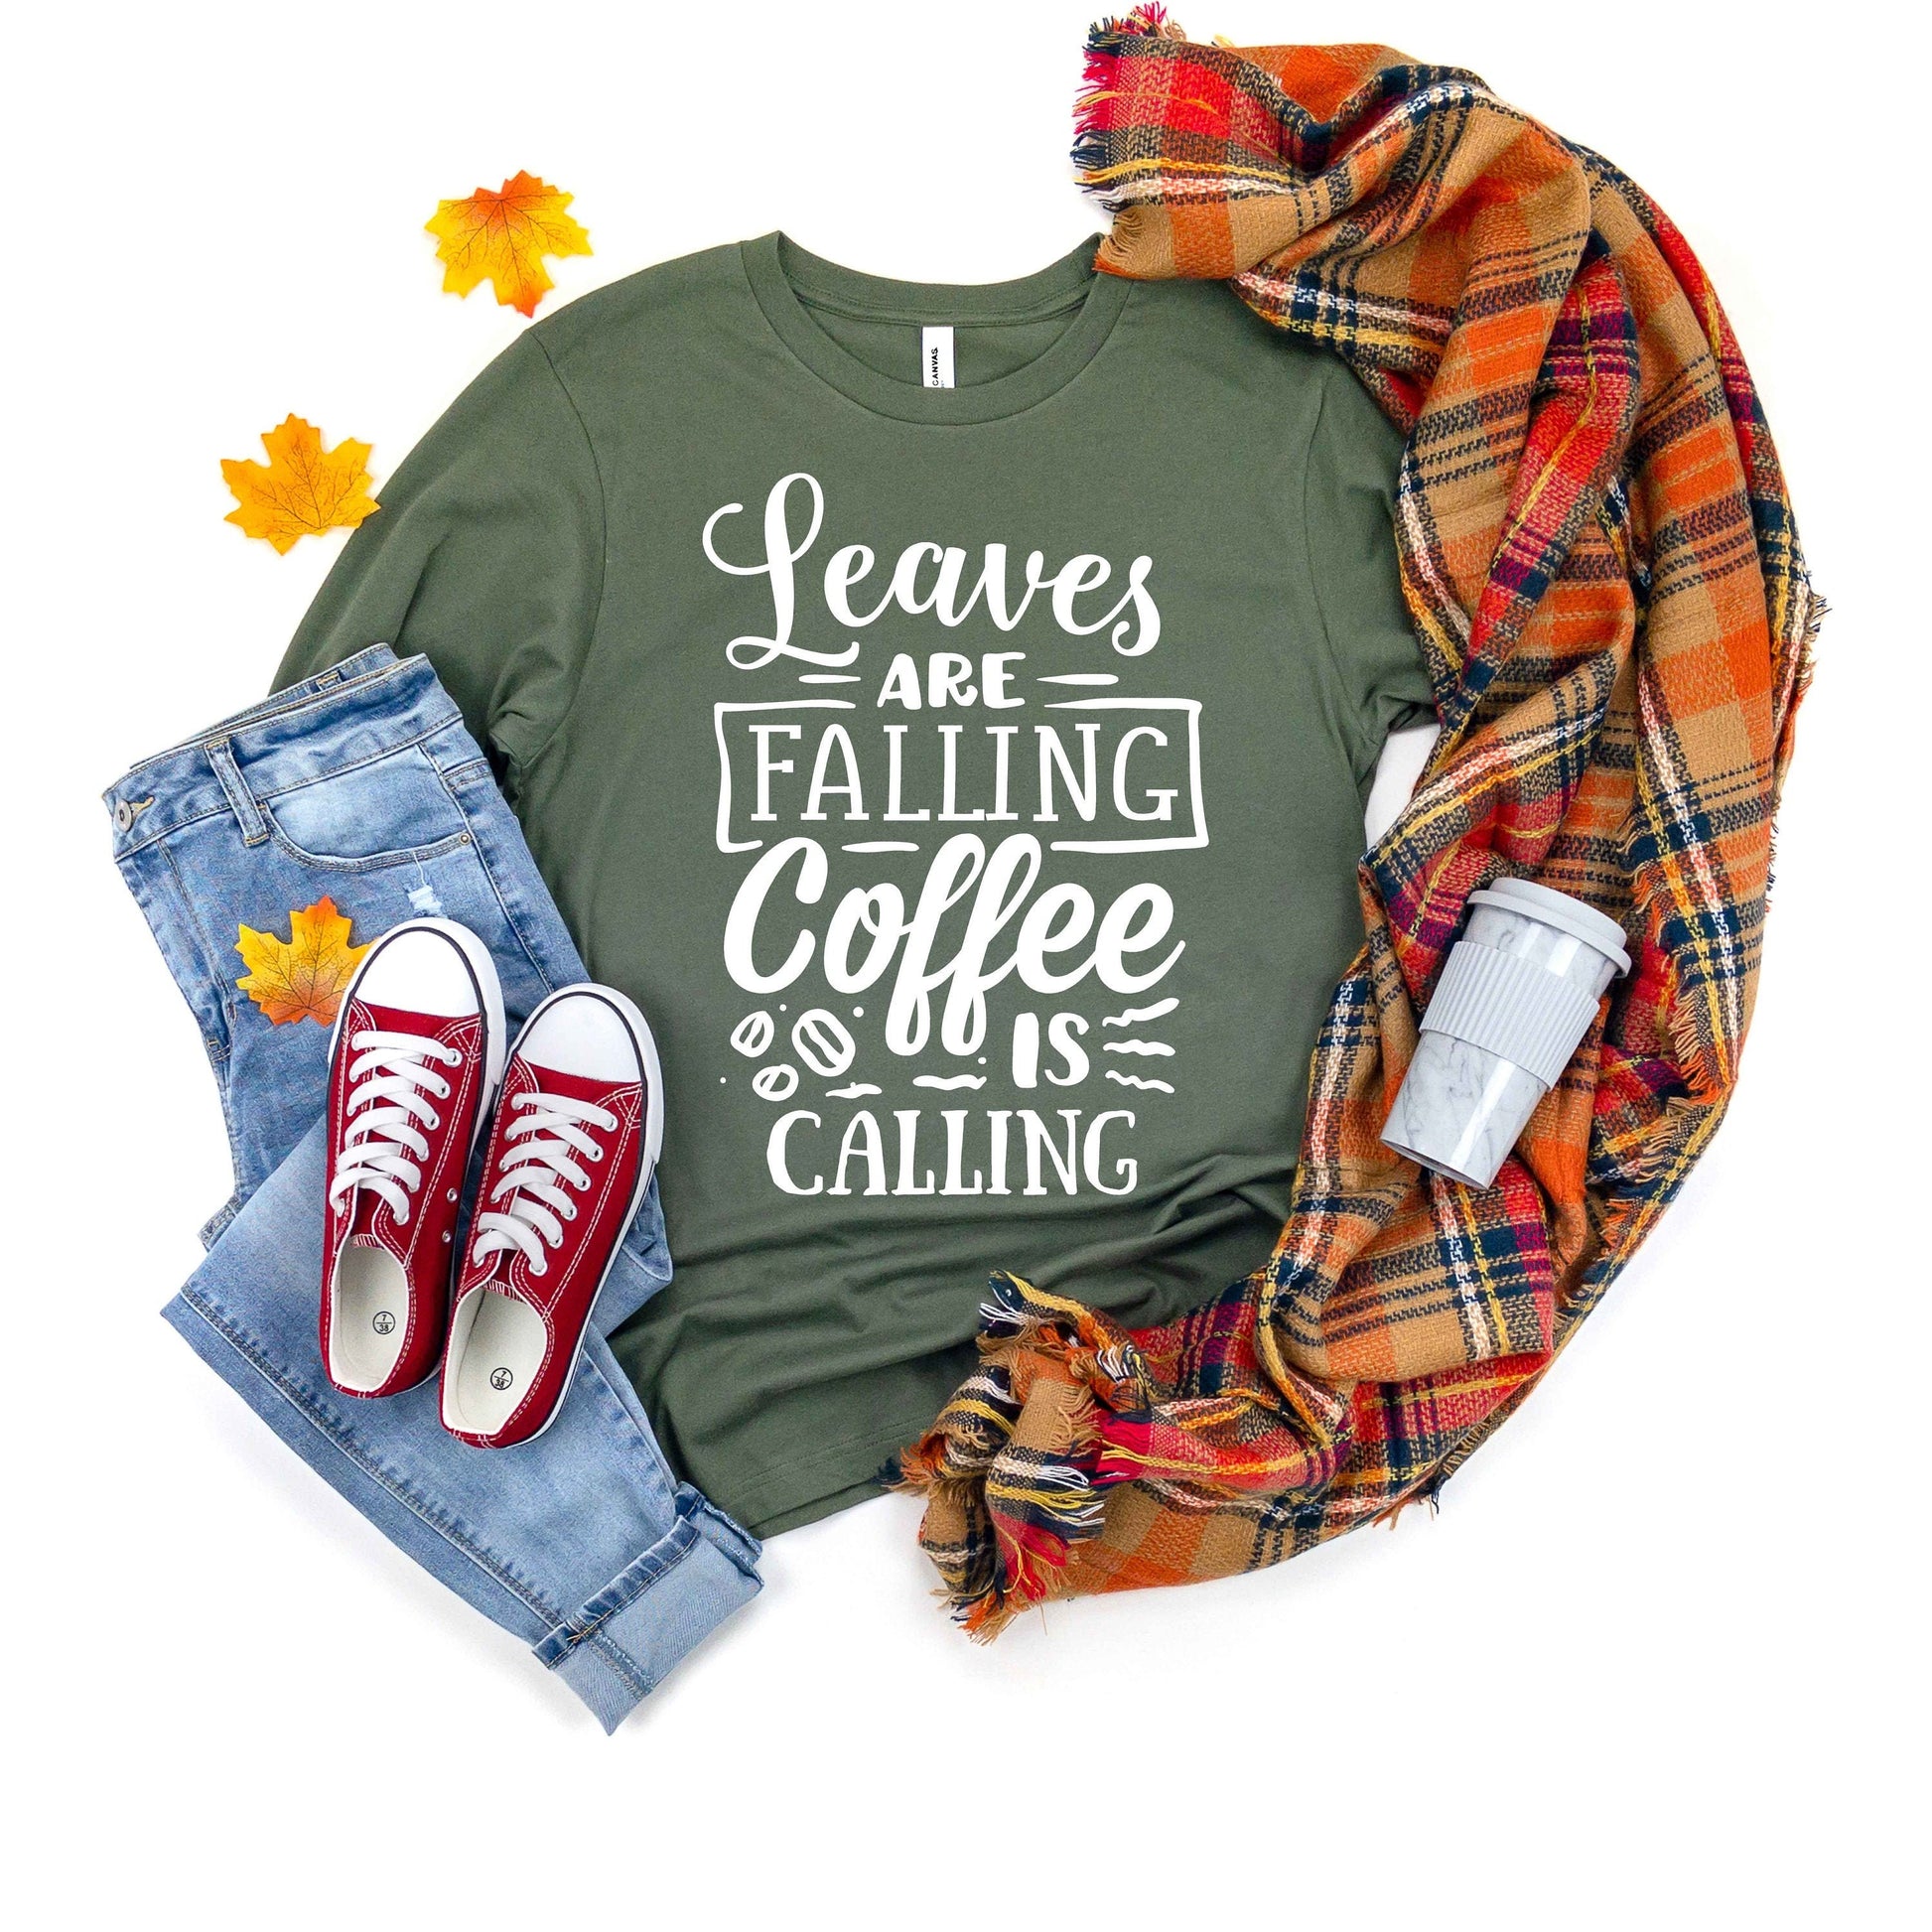 Long Sleeved Leaves are Falling Coffee is Calling unisex t-shirt, Thanksgiving Shirt, Fall Shirt For Women